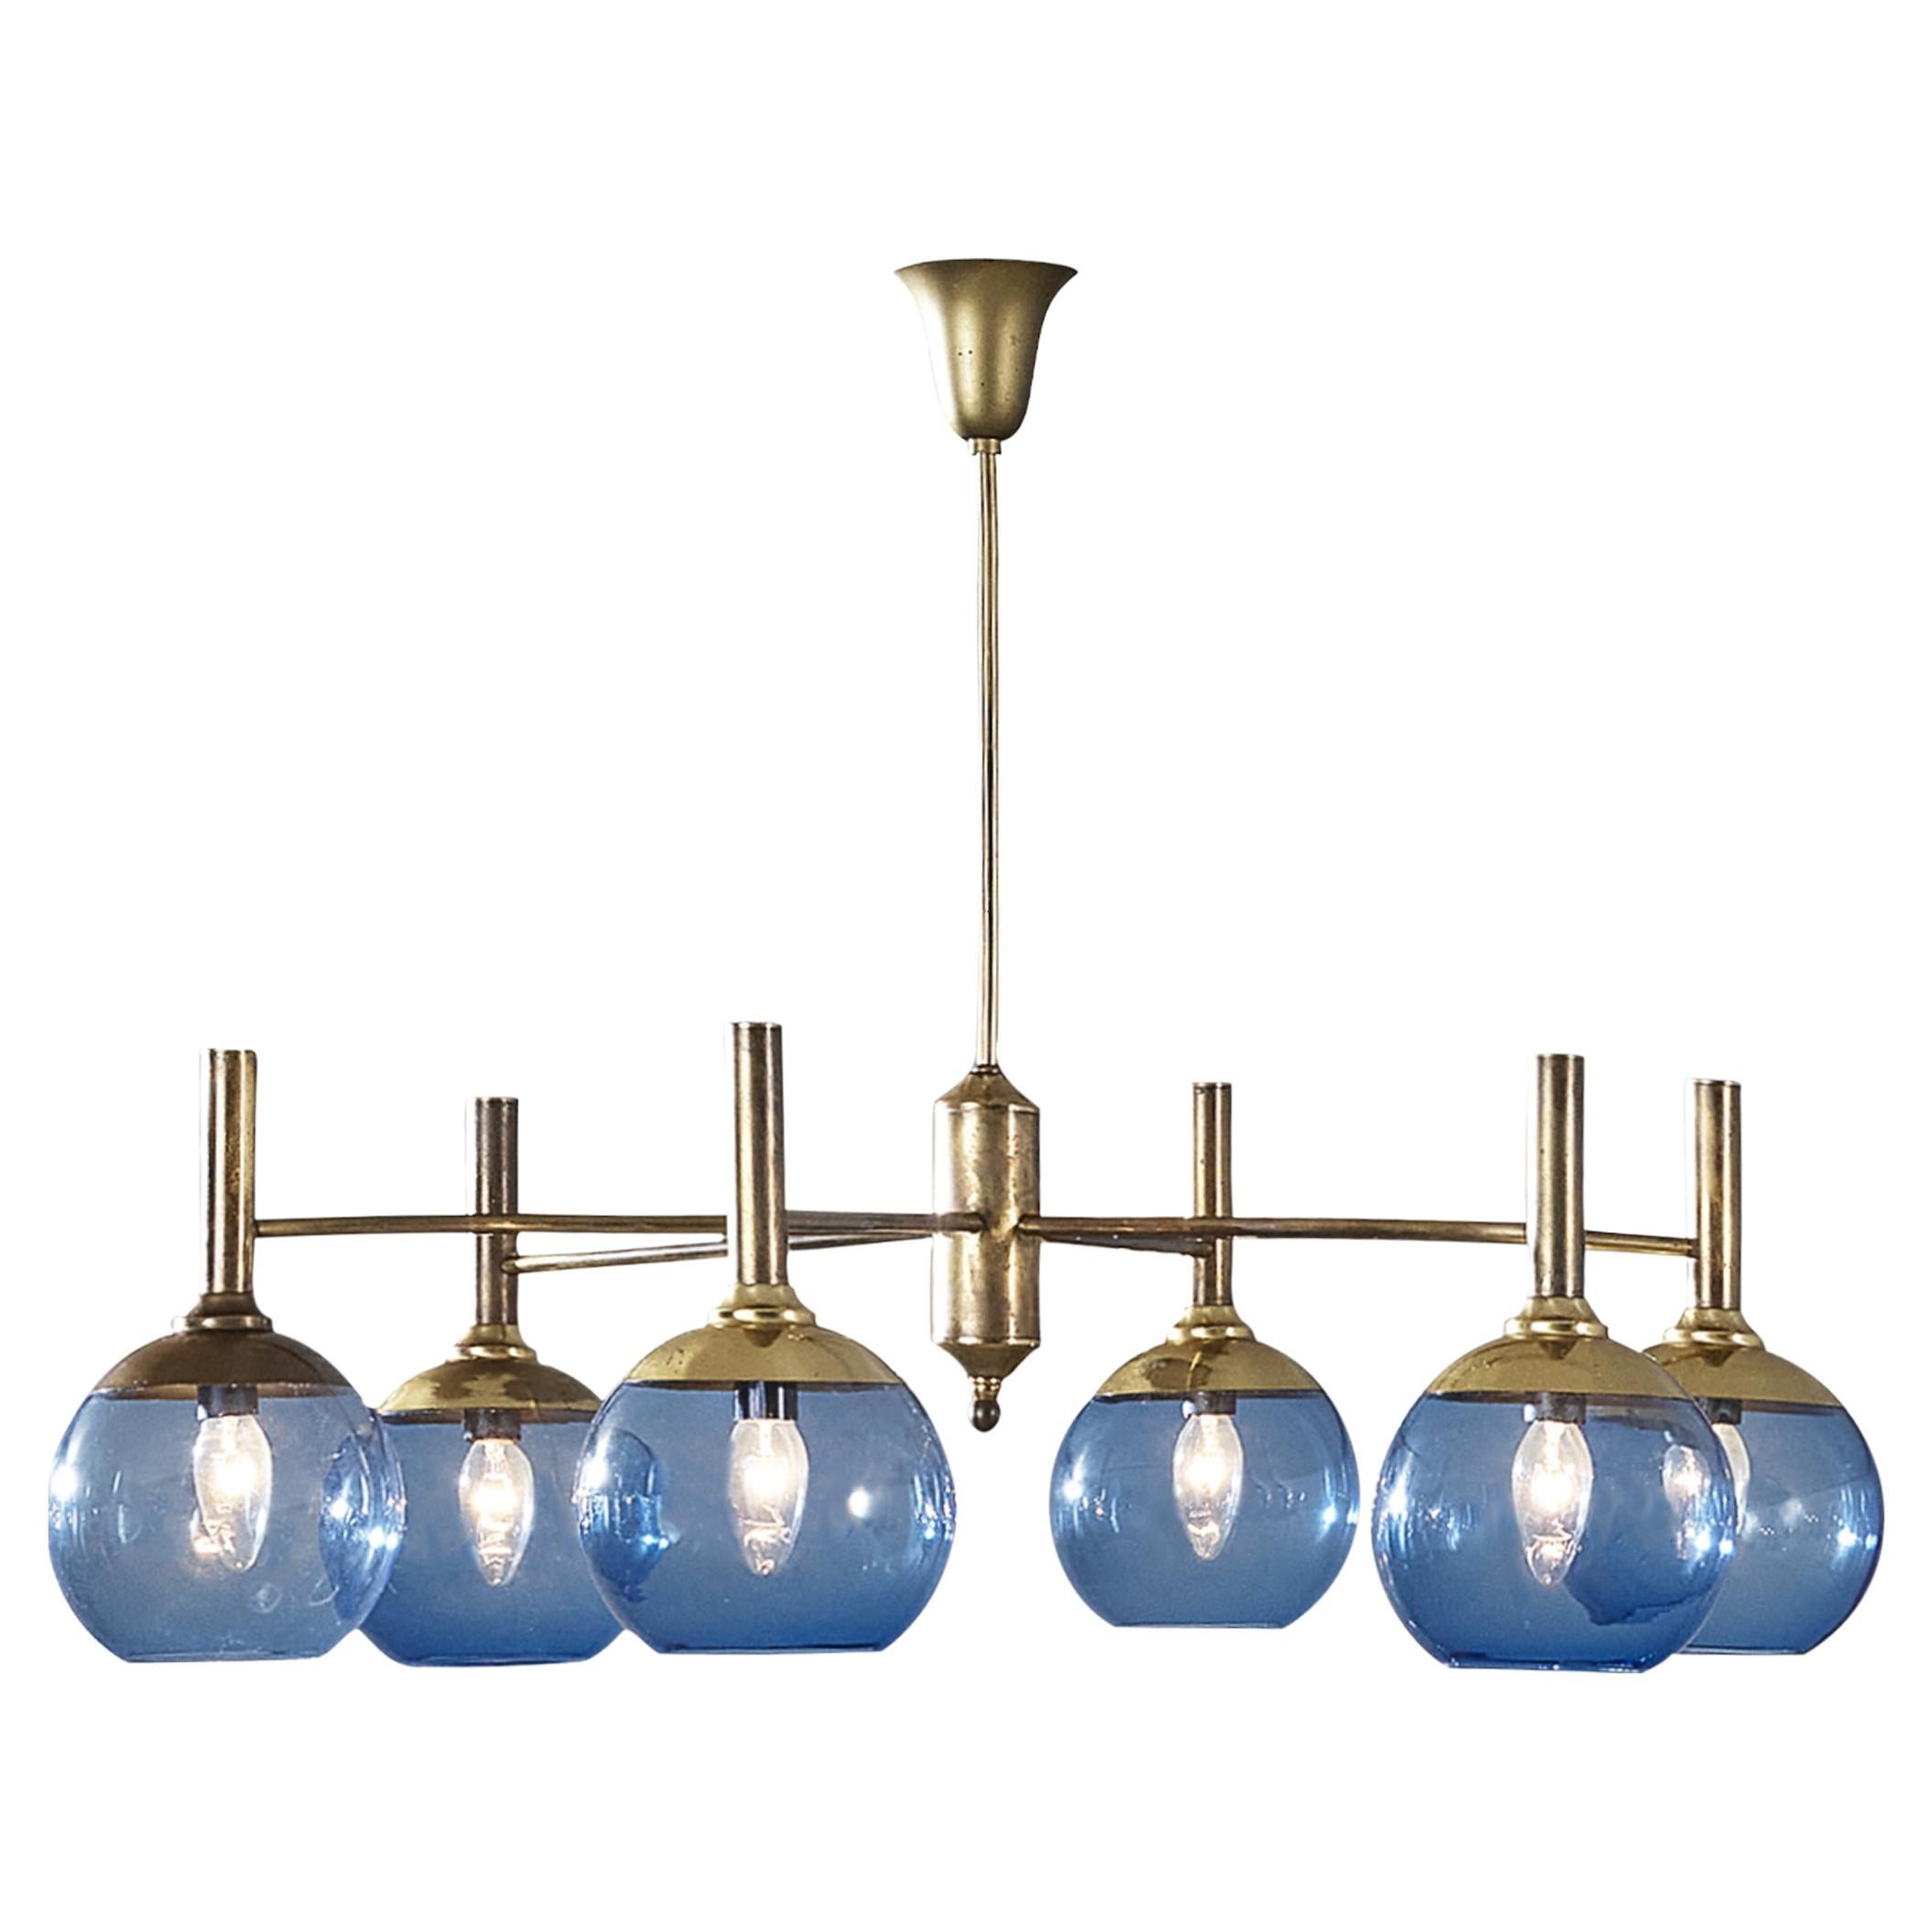 Hans-Agne Jakobsson Chandelier in Brass with Blue Shades 